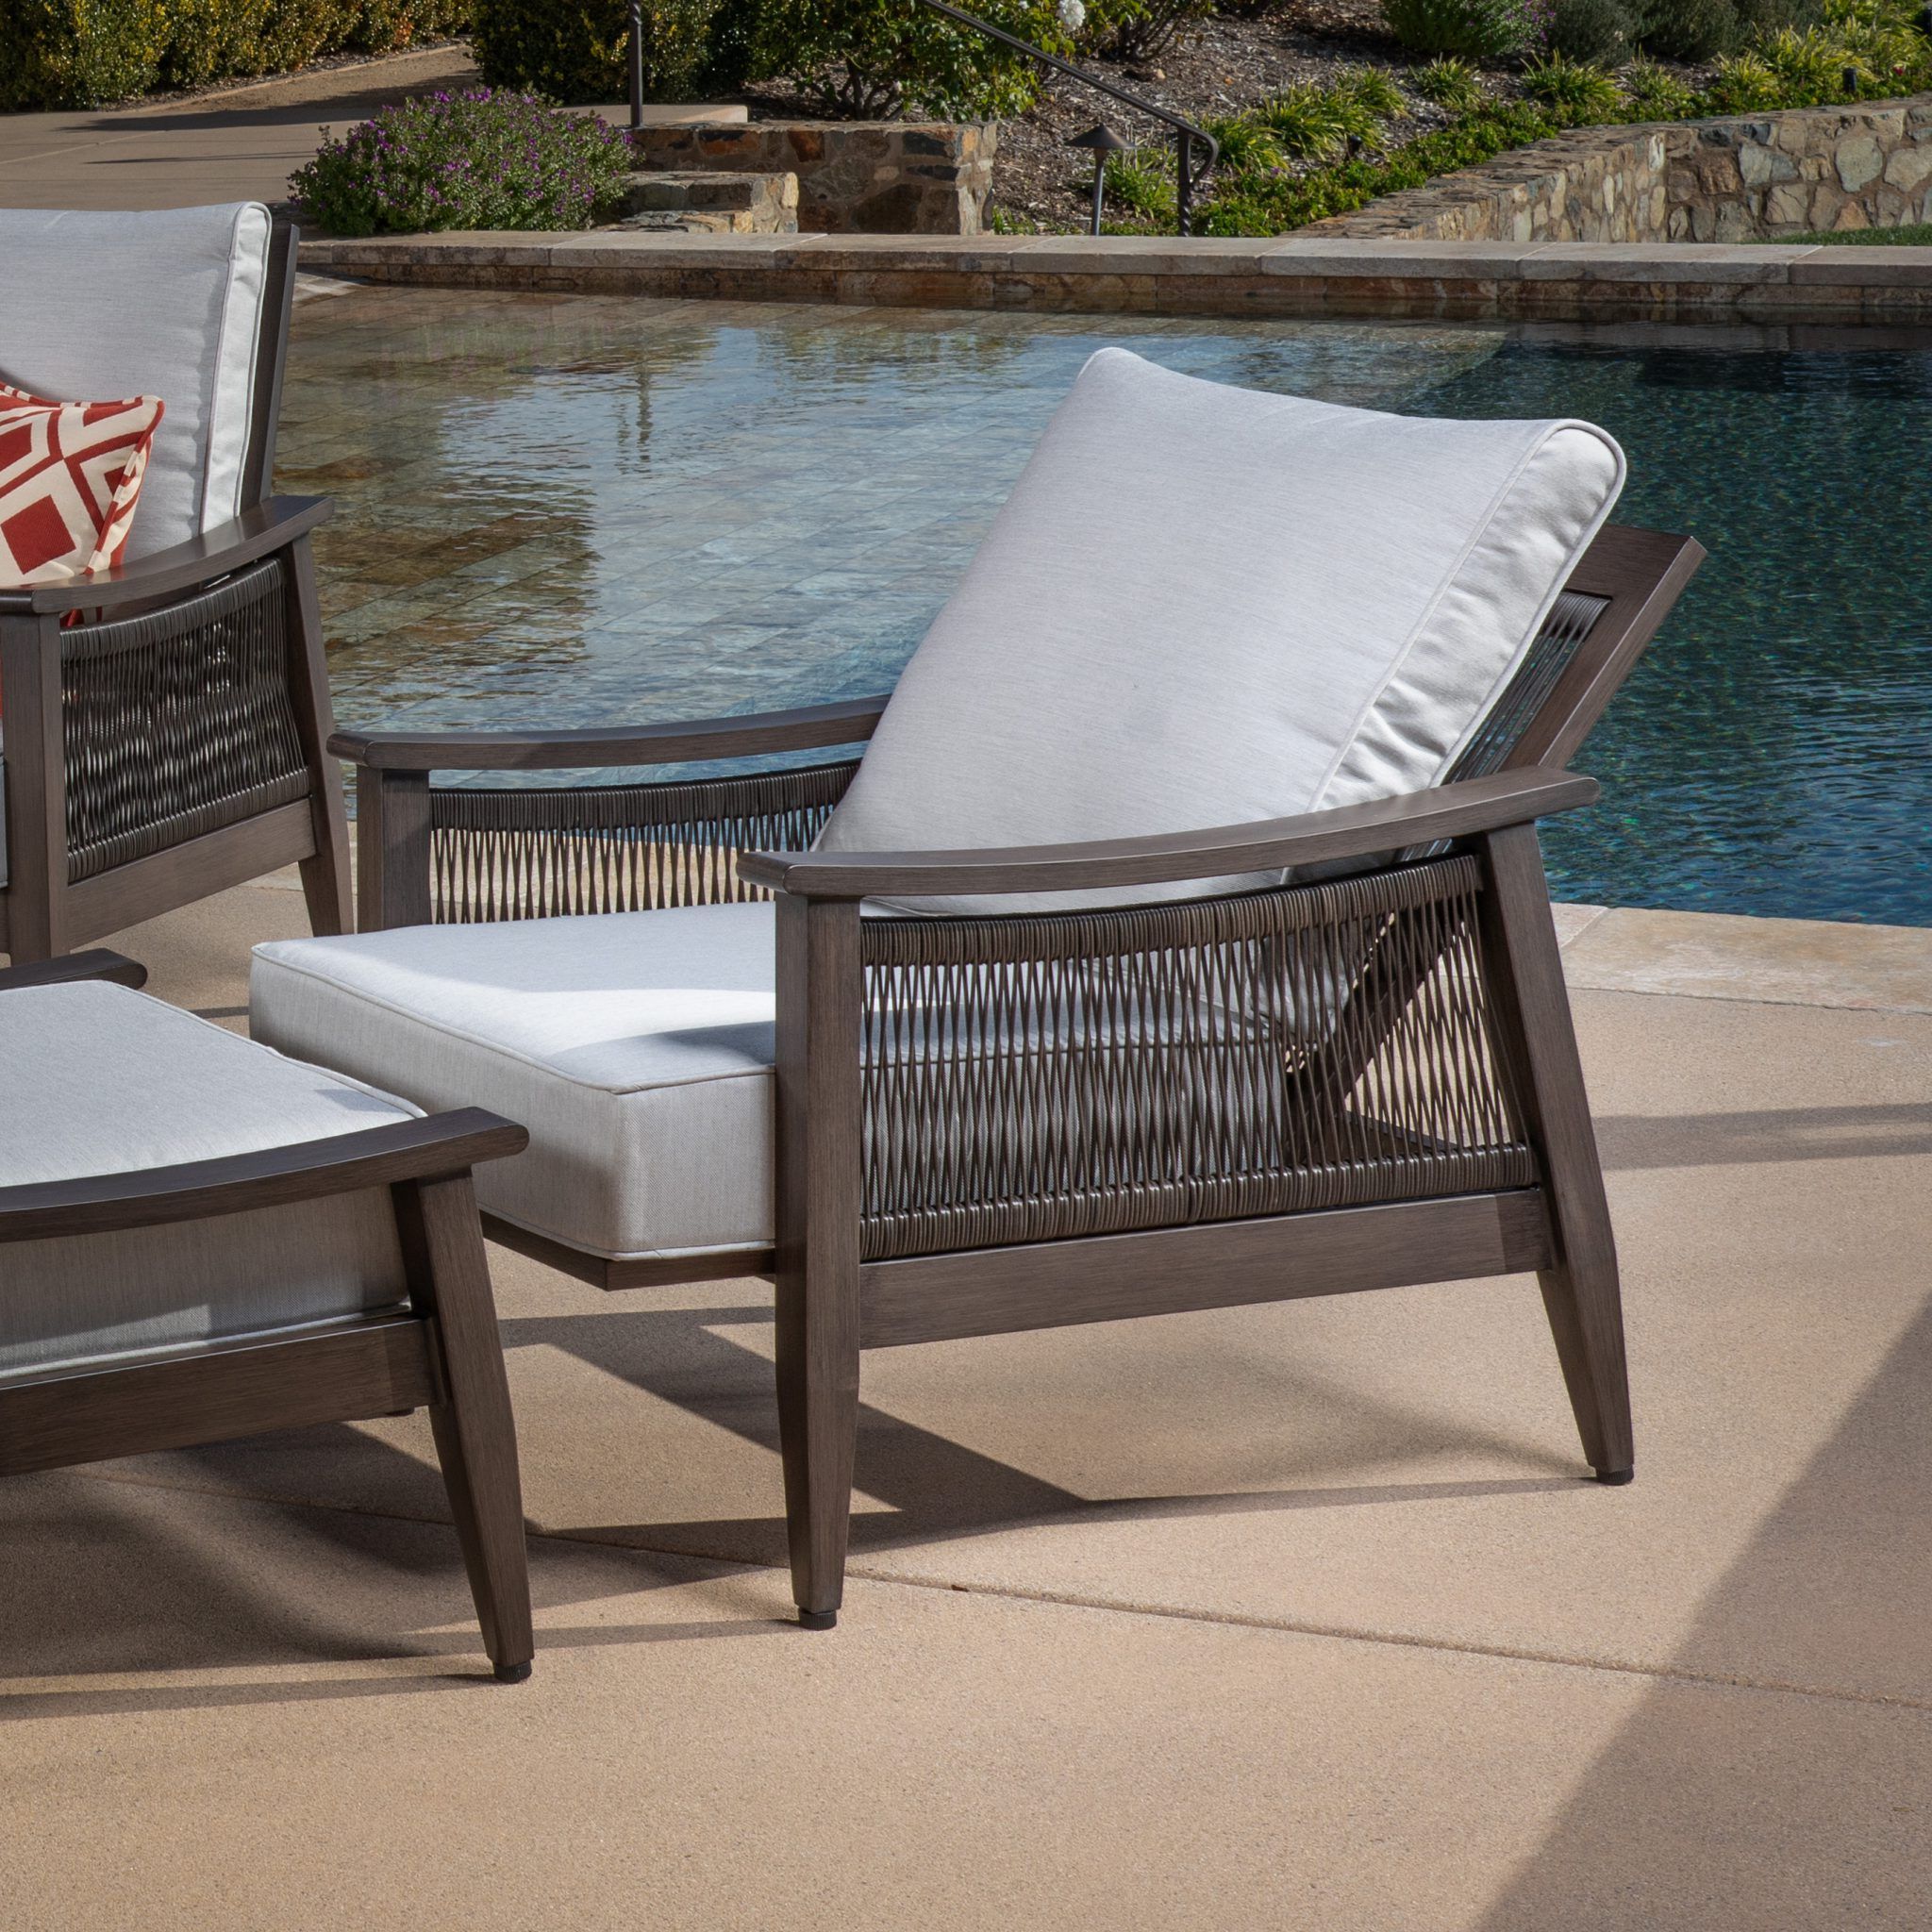 Mission Hills Furniture Throughout Natural All Weather Outdoor Seating Patio Sets (View 8 of 15)